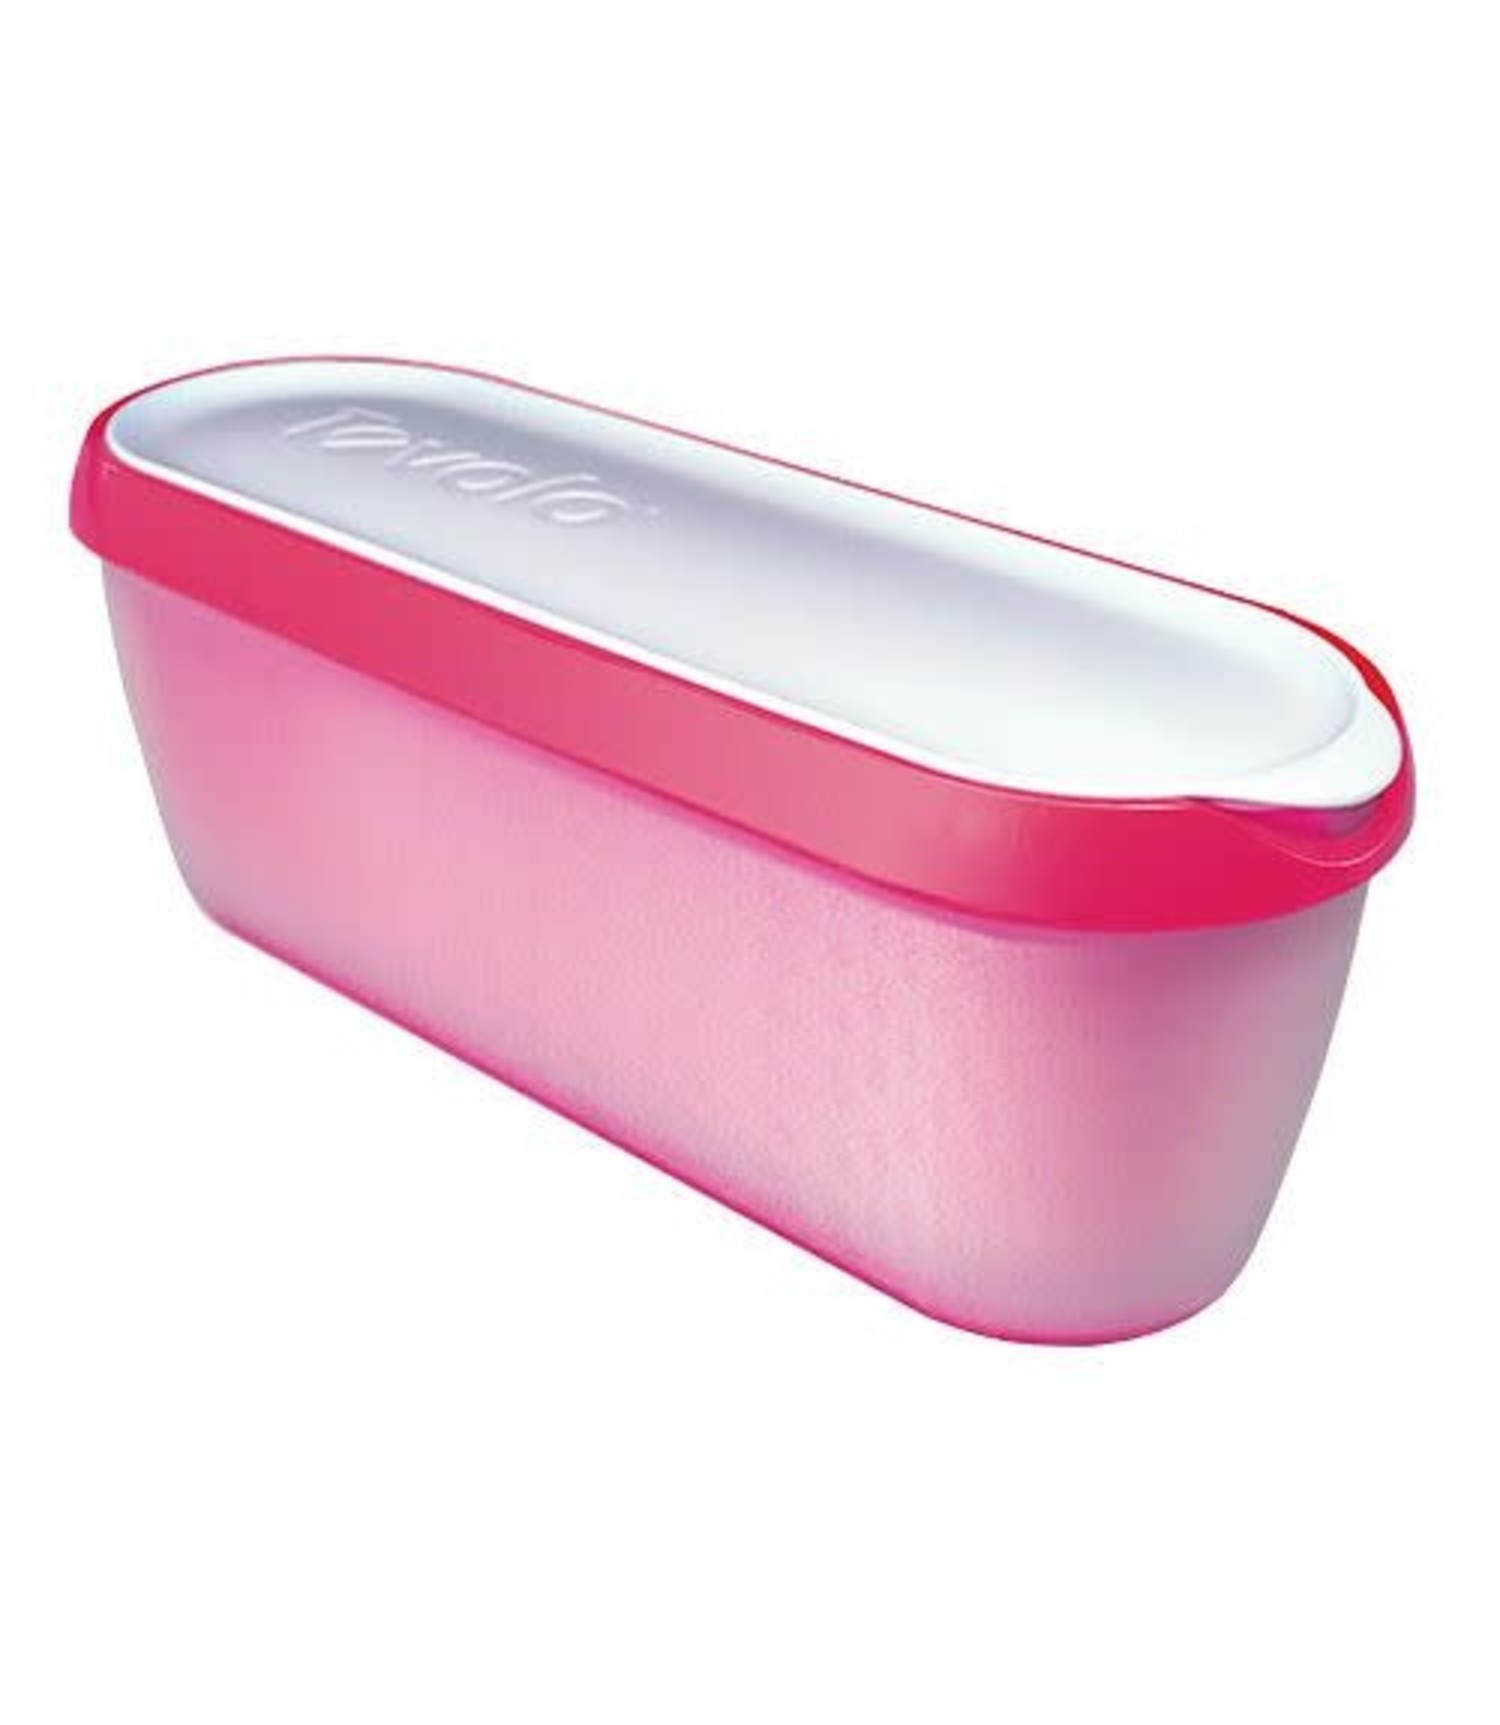 Tovolo 1.5 quart Strawberry Pink Ice Cream Storage Container - Whisk